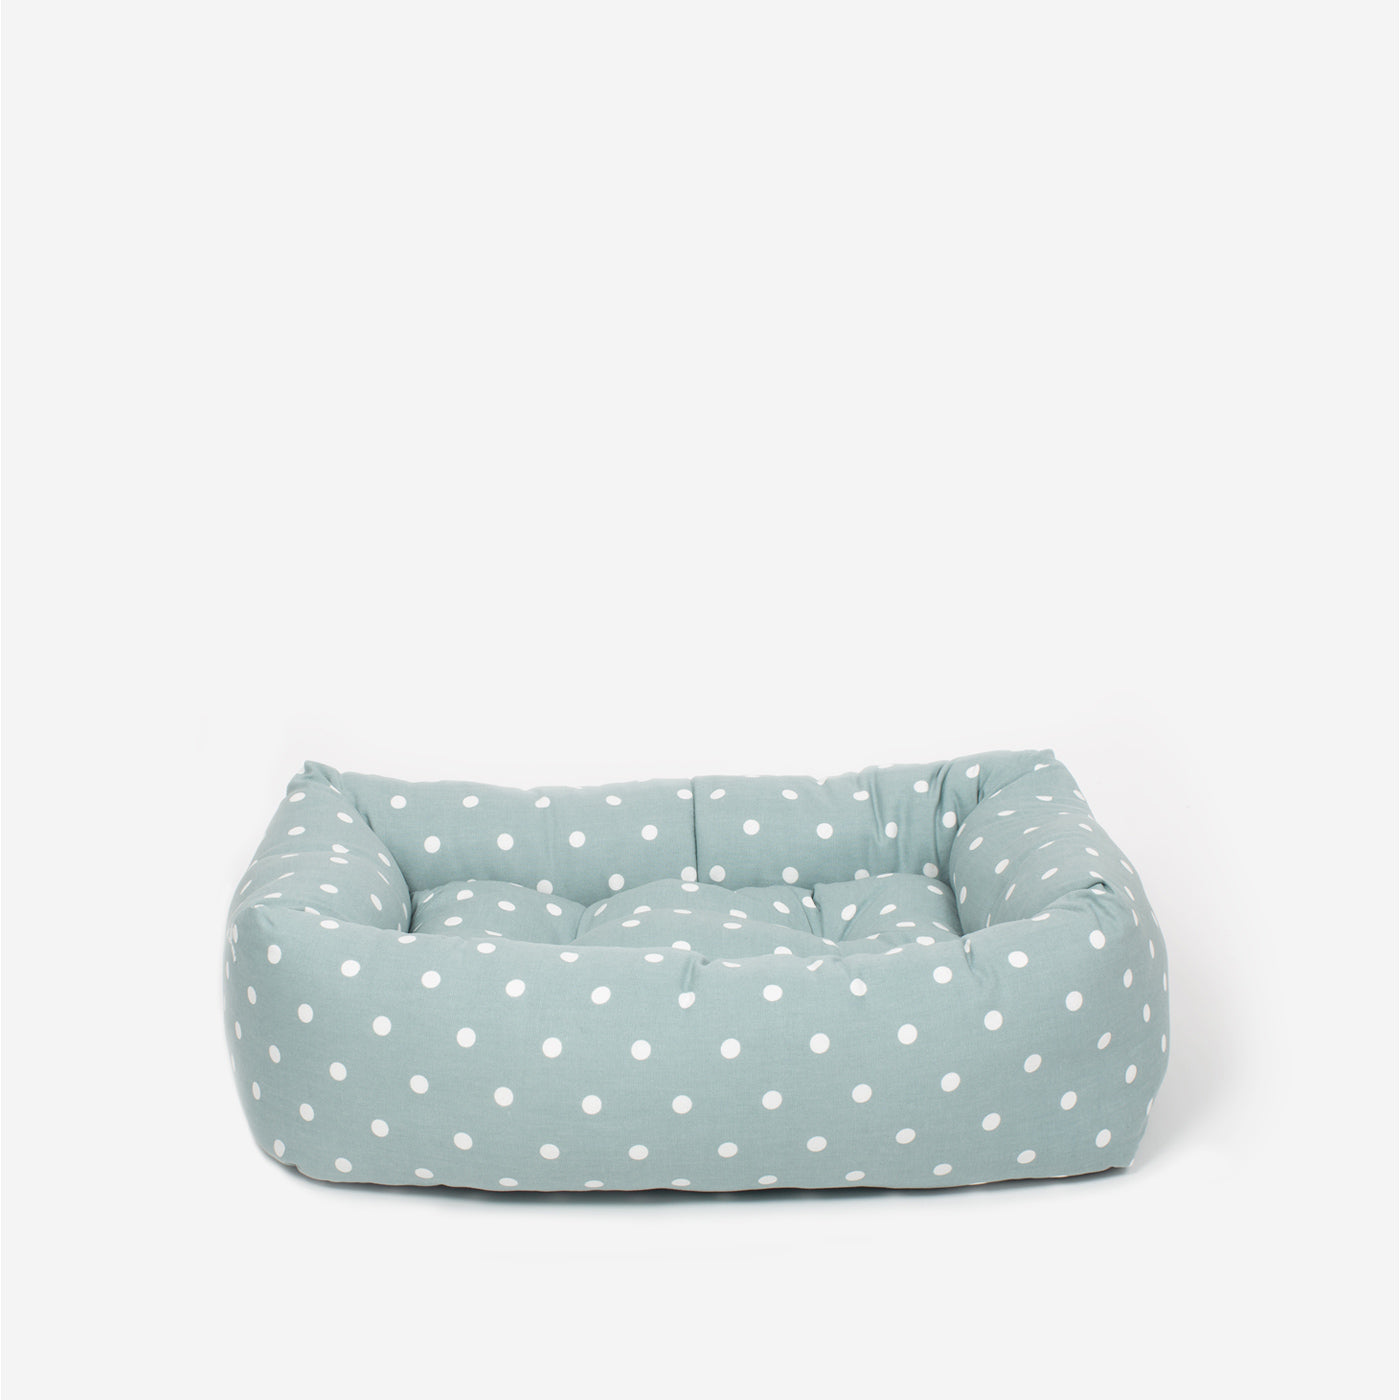  Cosy & Calm Puppy Crate Bed, The Perfect Dog Crate Accessory For The Ultimate Dog Den! In Stunning Duck Egg Spot! Available Now at Lords & Labradors